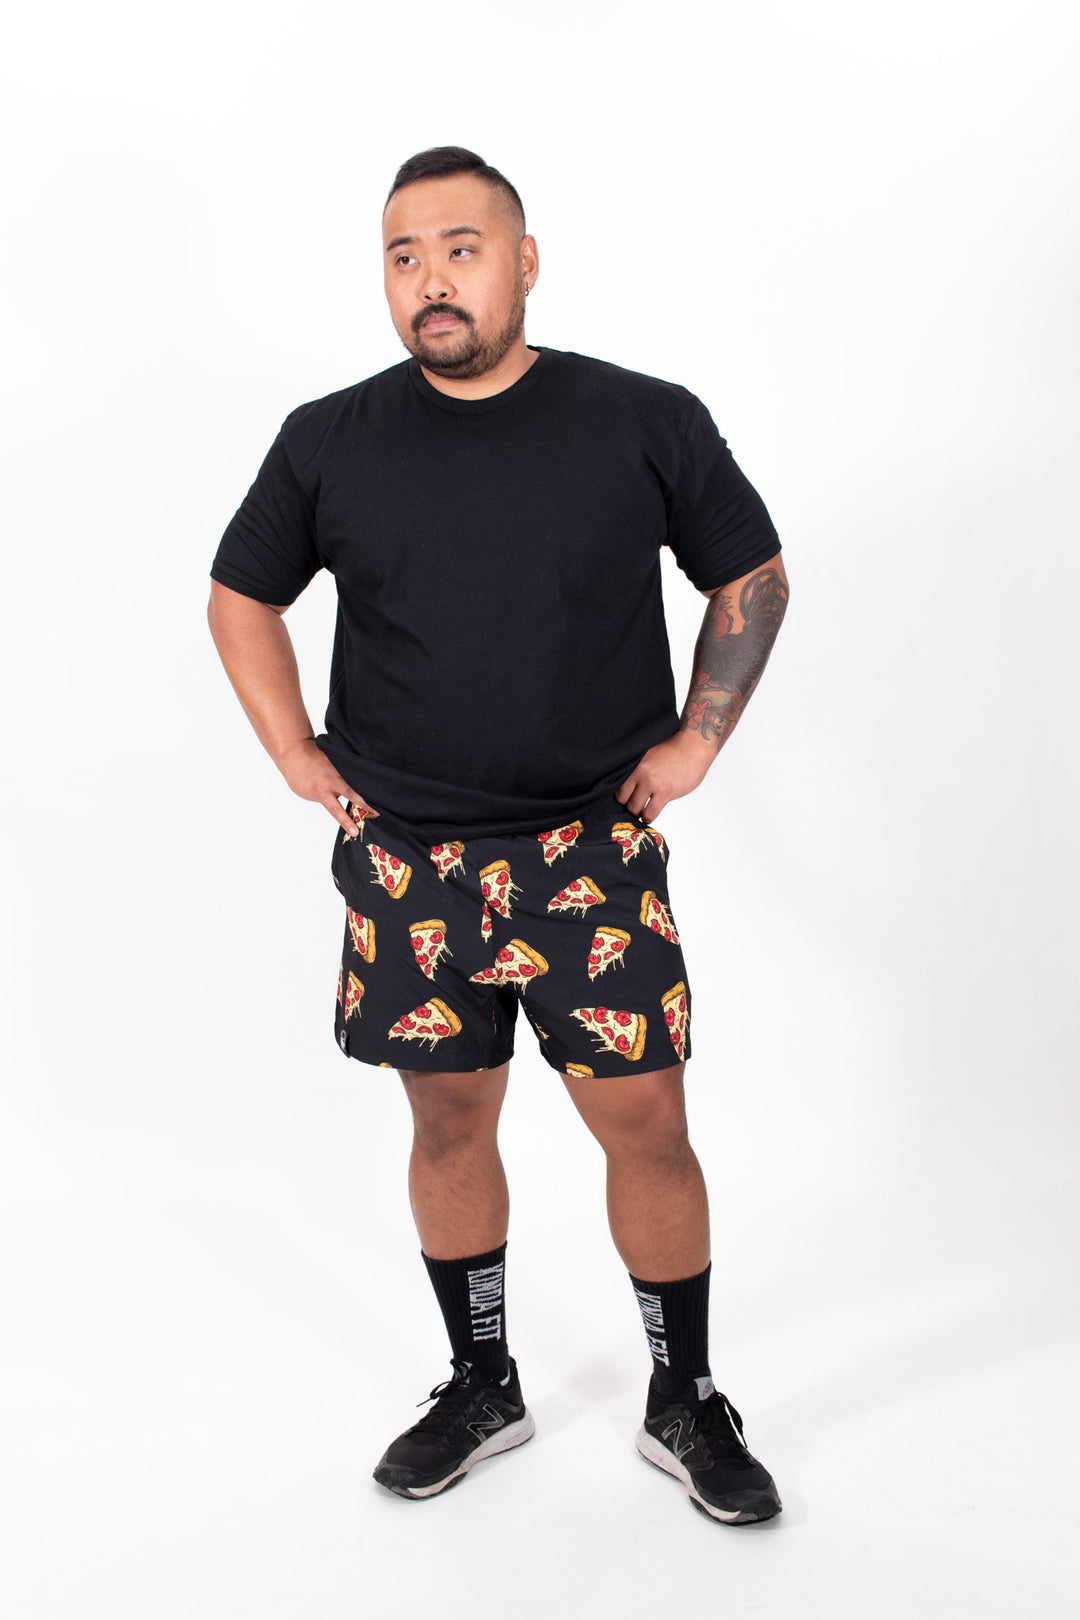 Dean wearing black Plateroni Pizza Training Shorts in size L